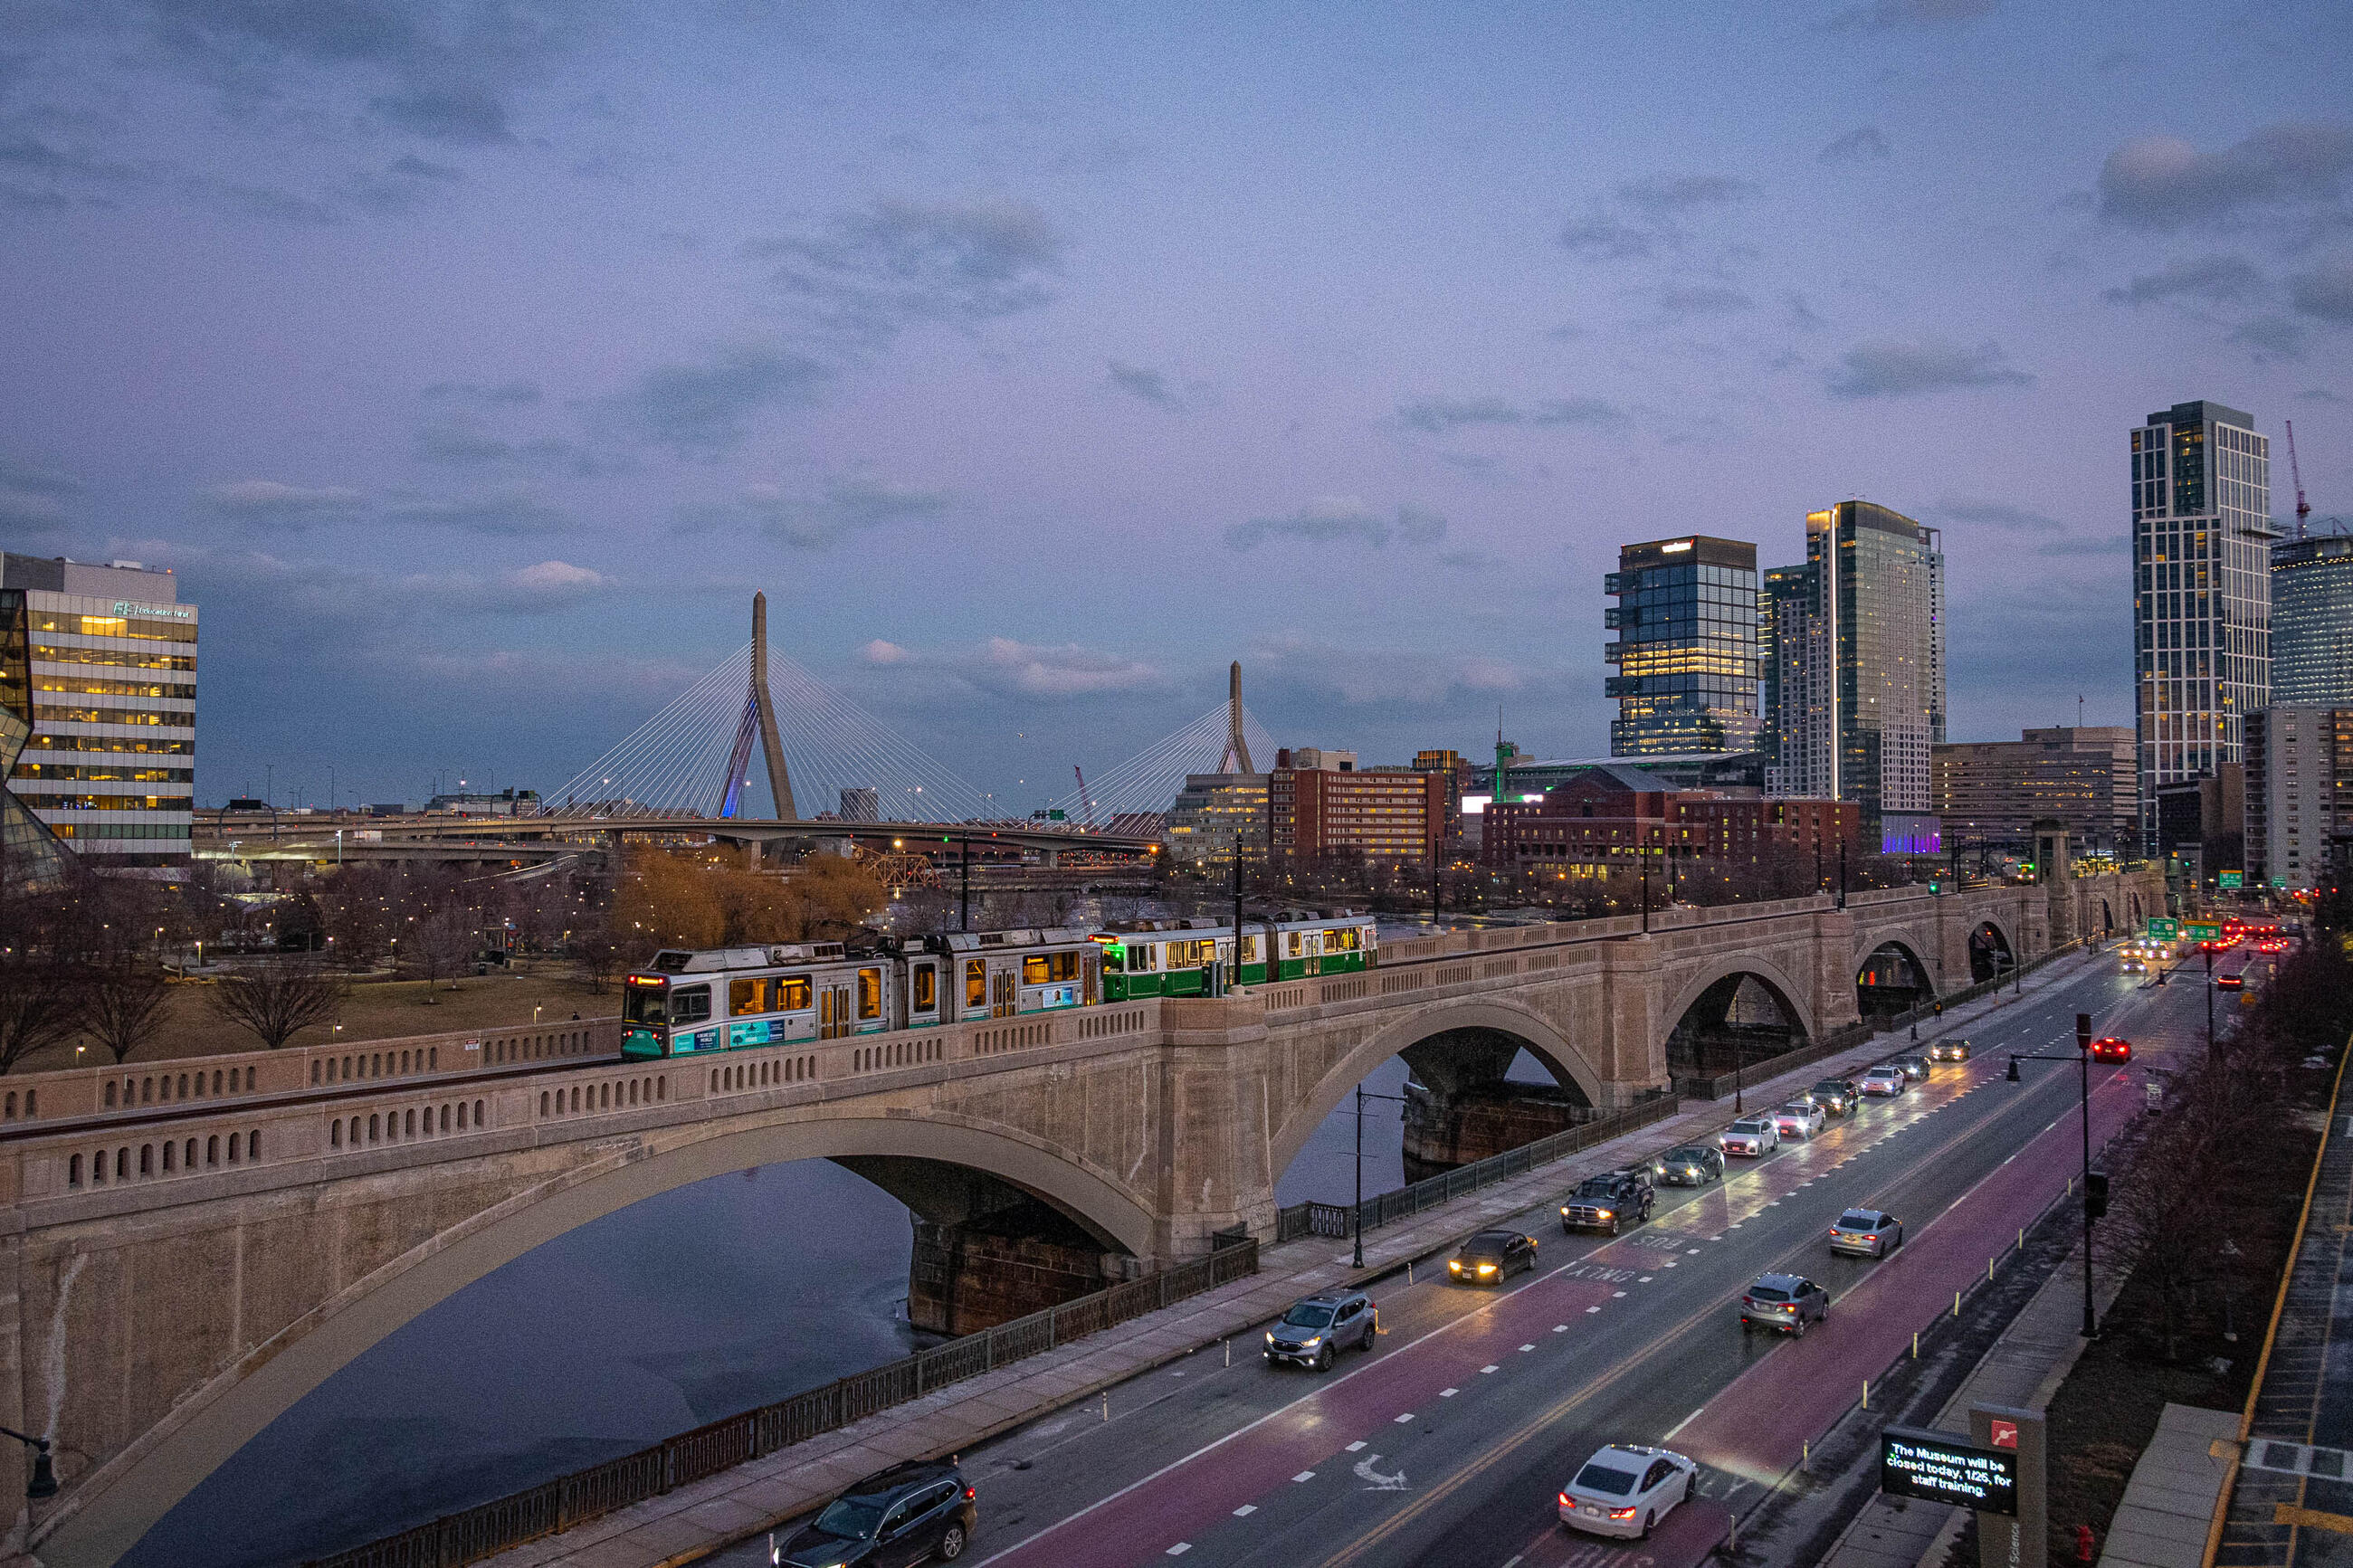 an empty green line train crossing the lechmere viaduct, with some boston skyline visible in the background, road traffic in the foreground, and a pretty pink and purple sunrise backdrop